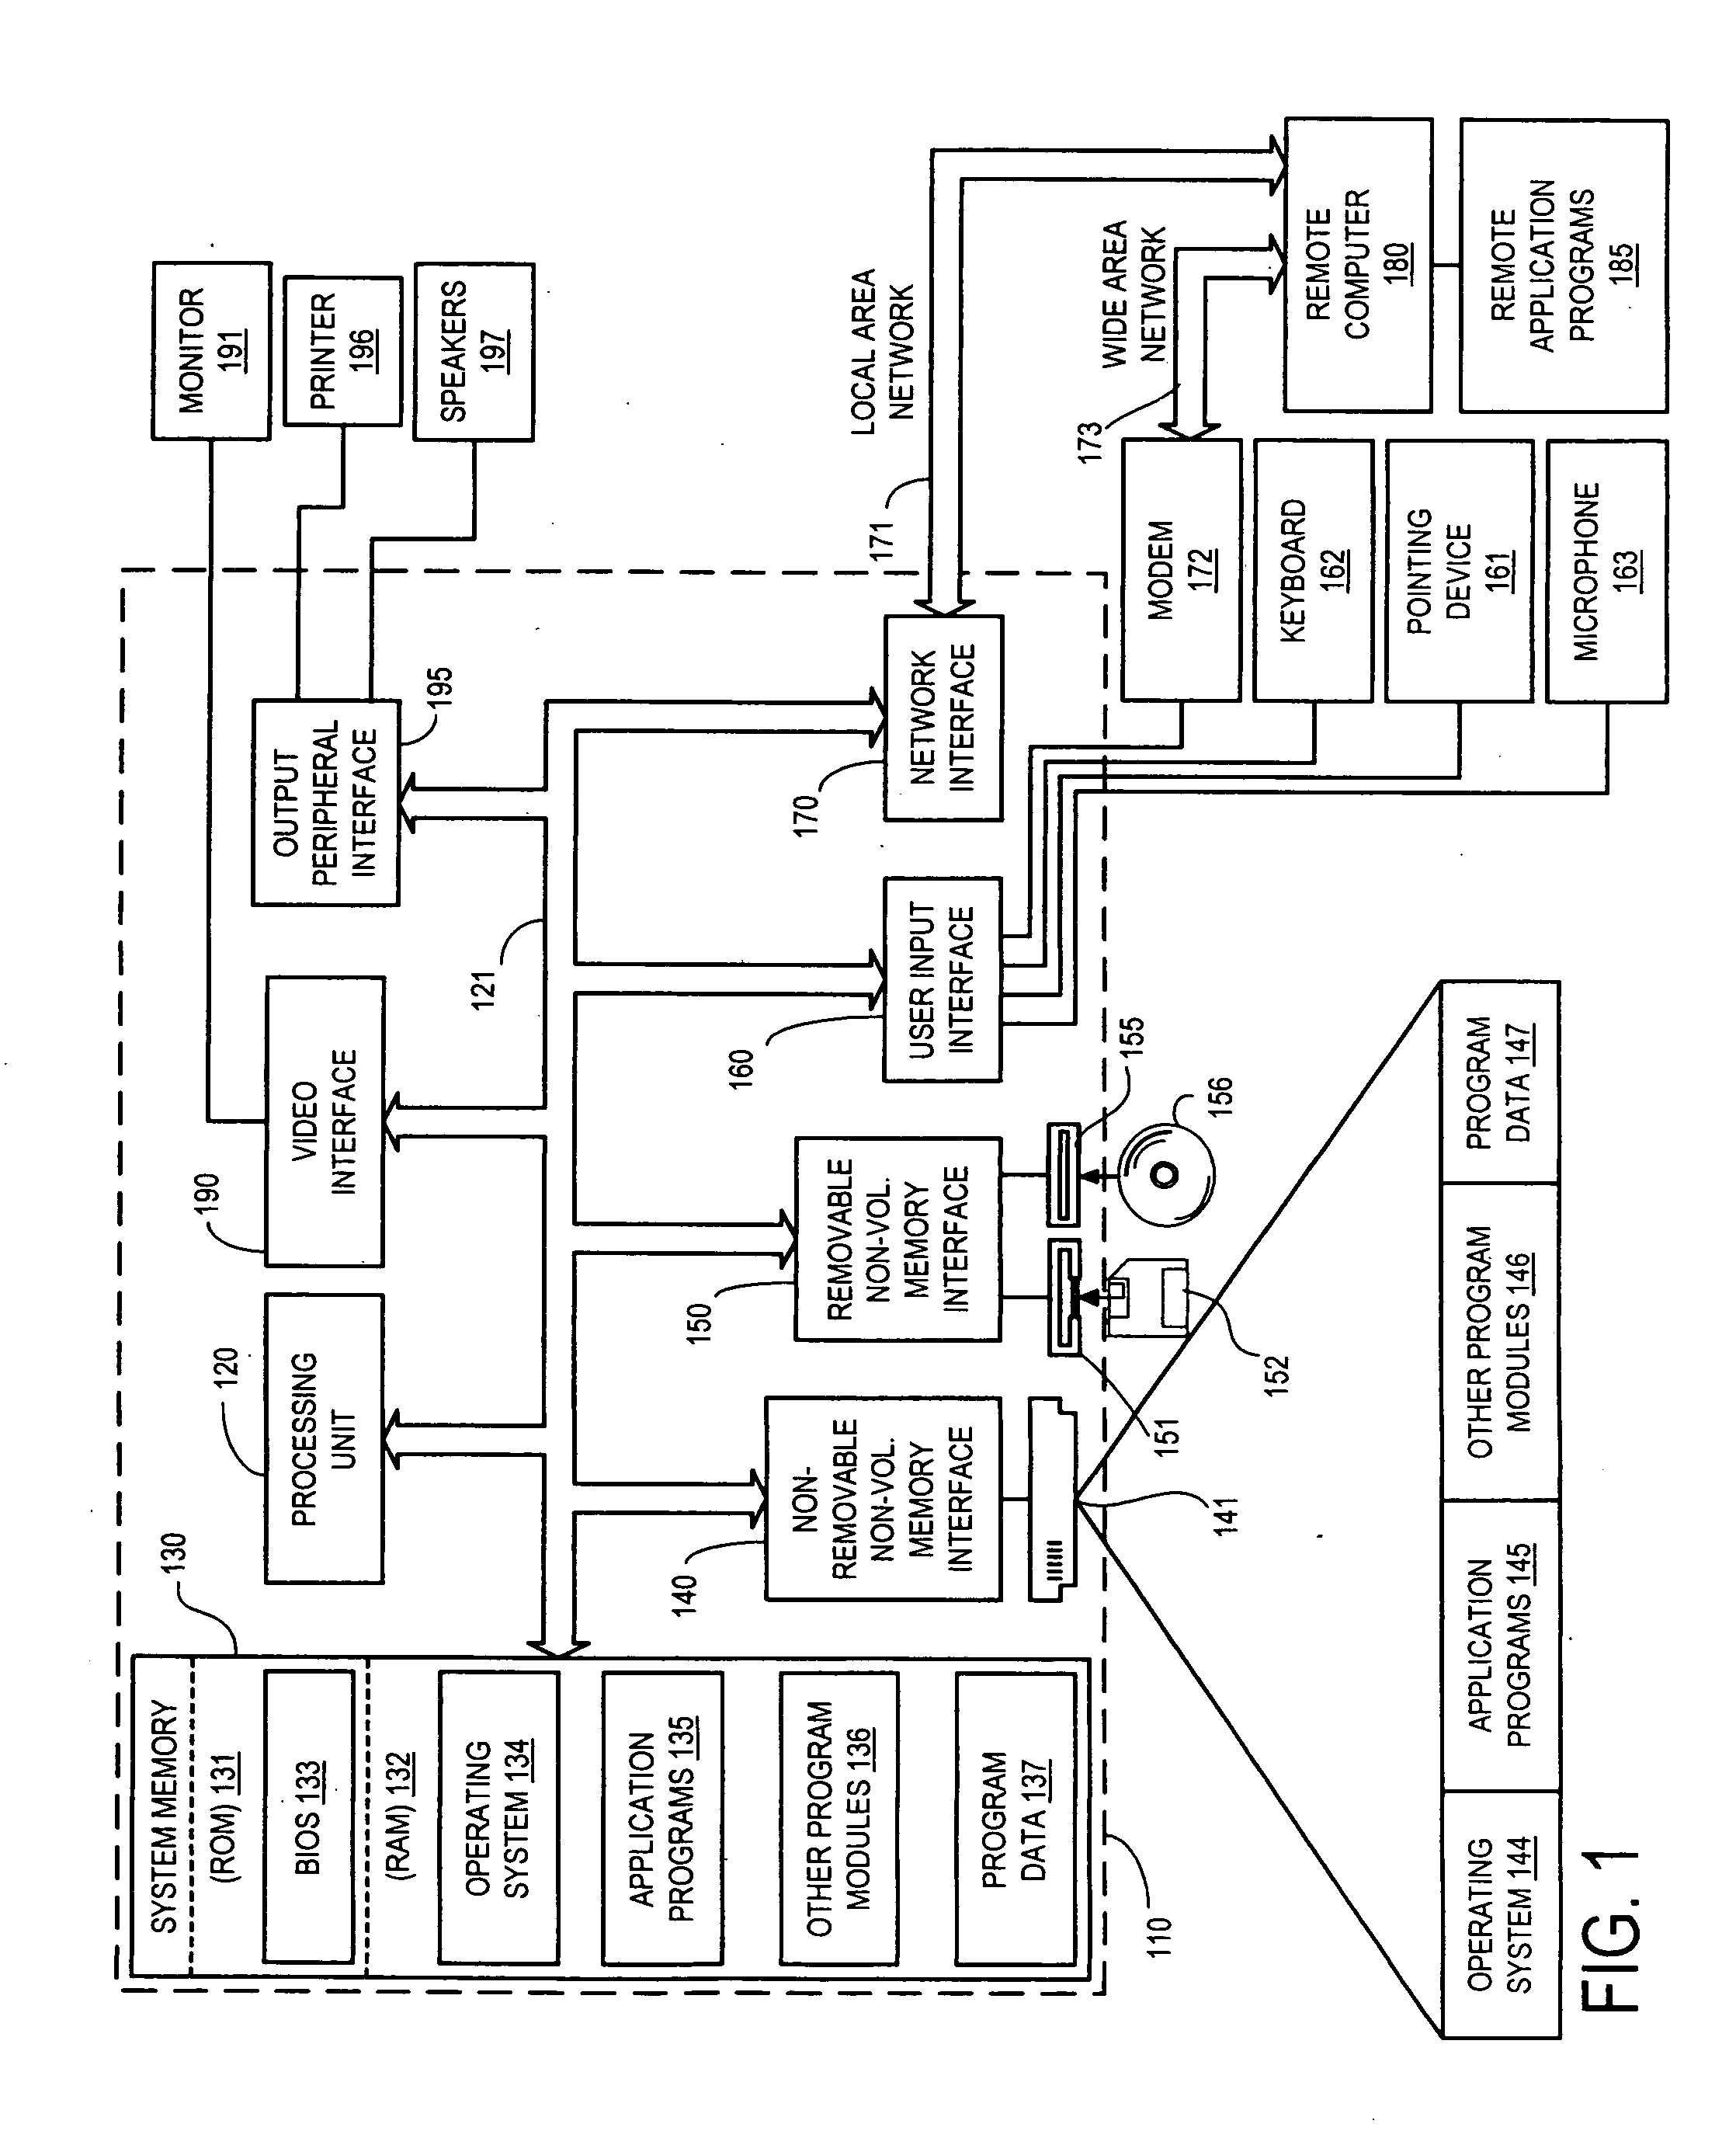 Middleware layer between speech related applications and engines